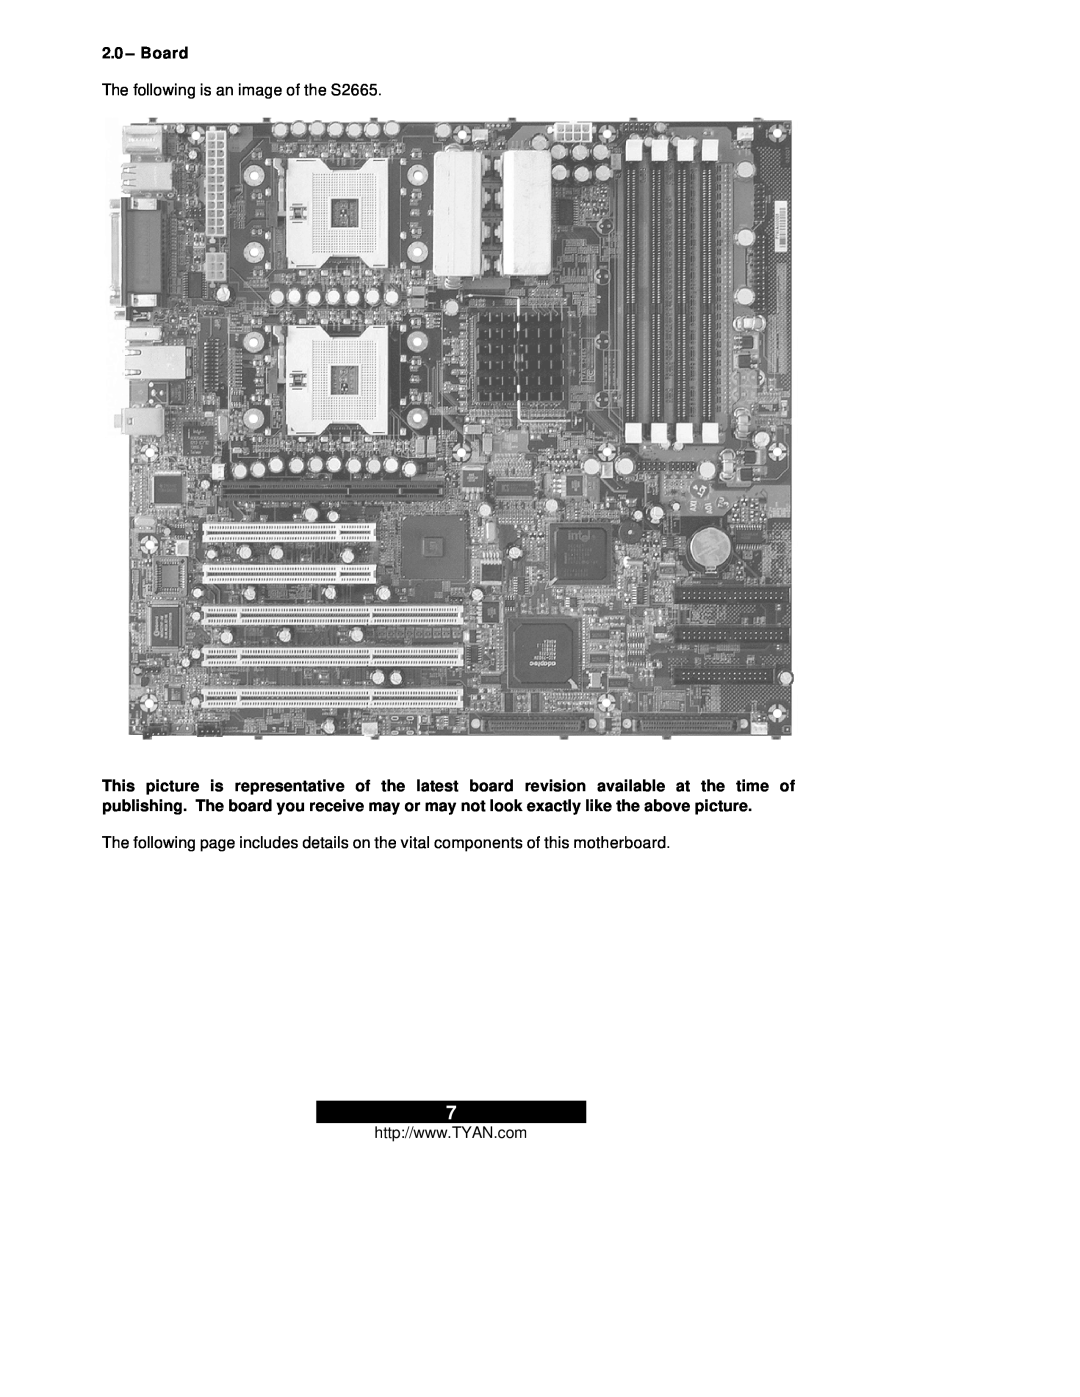 Tyan Computer Thunder i7505 warranty Board, The following is an image of the S2665 